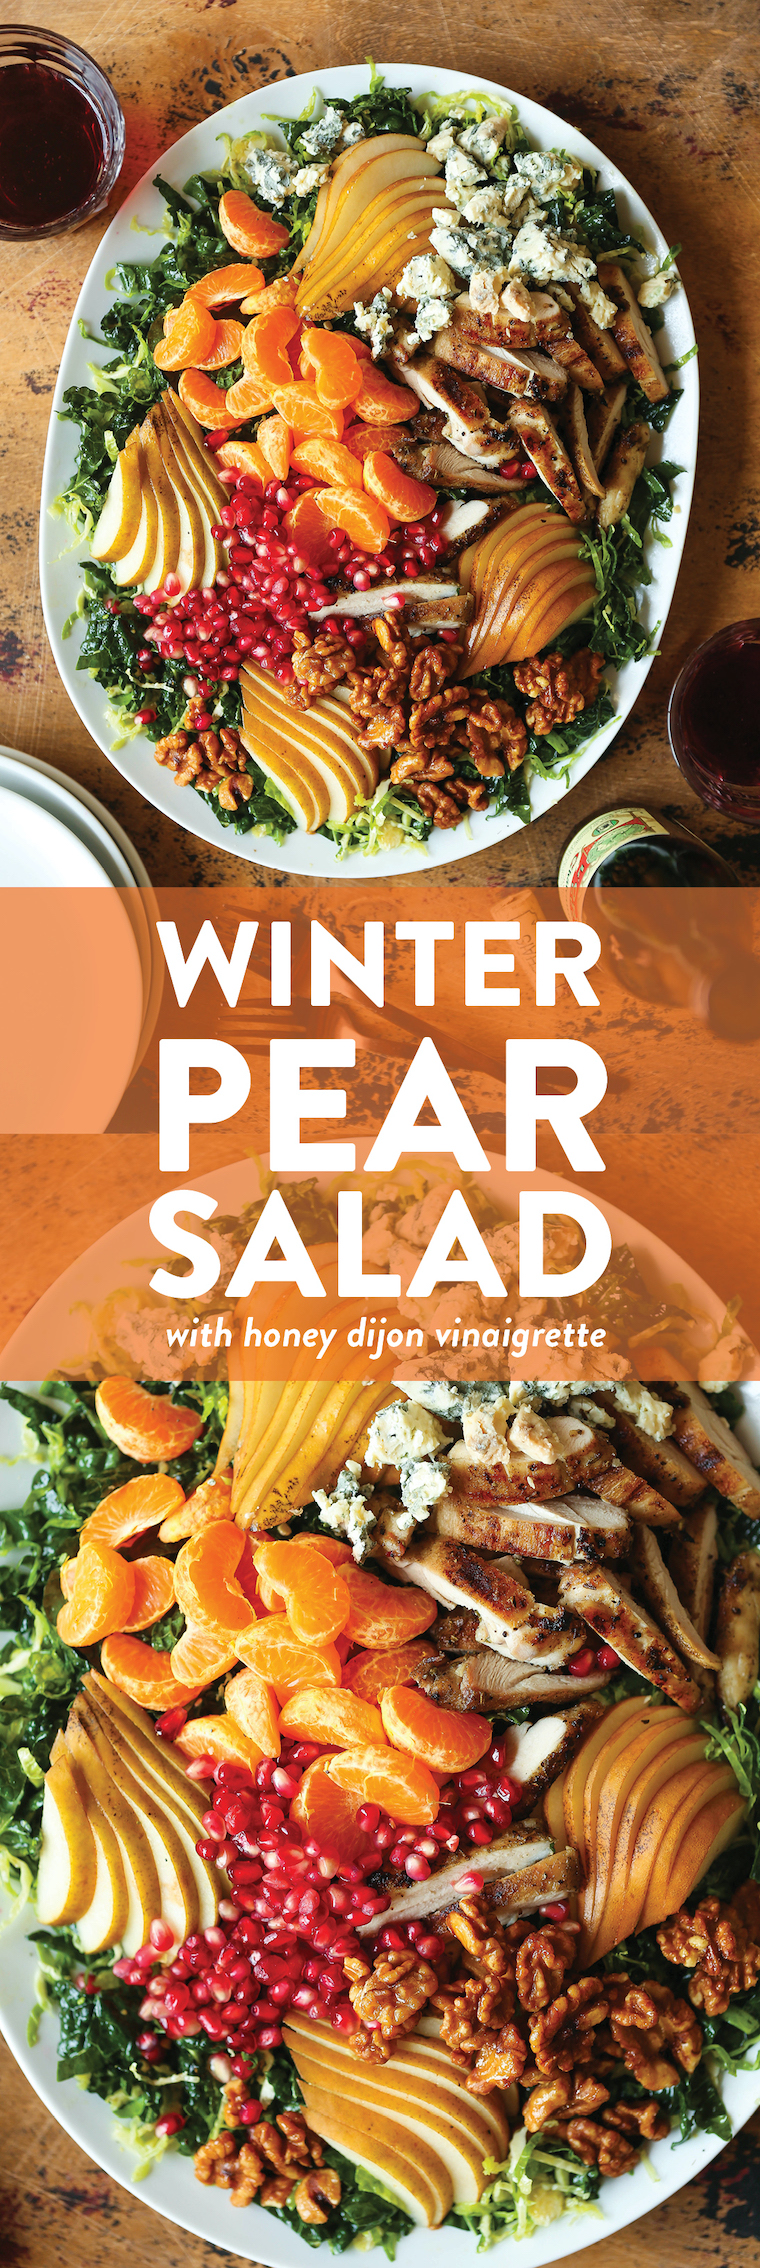 Winter Pear Salad - So hearty with so many feel-good ingredients! Lemon rosemary chicken, brussels sprouts, pear and a honey dijon dressing!